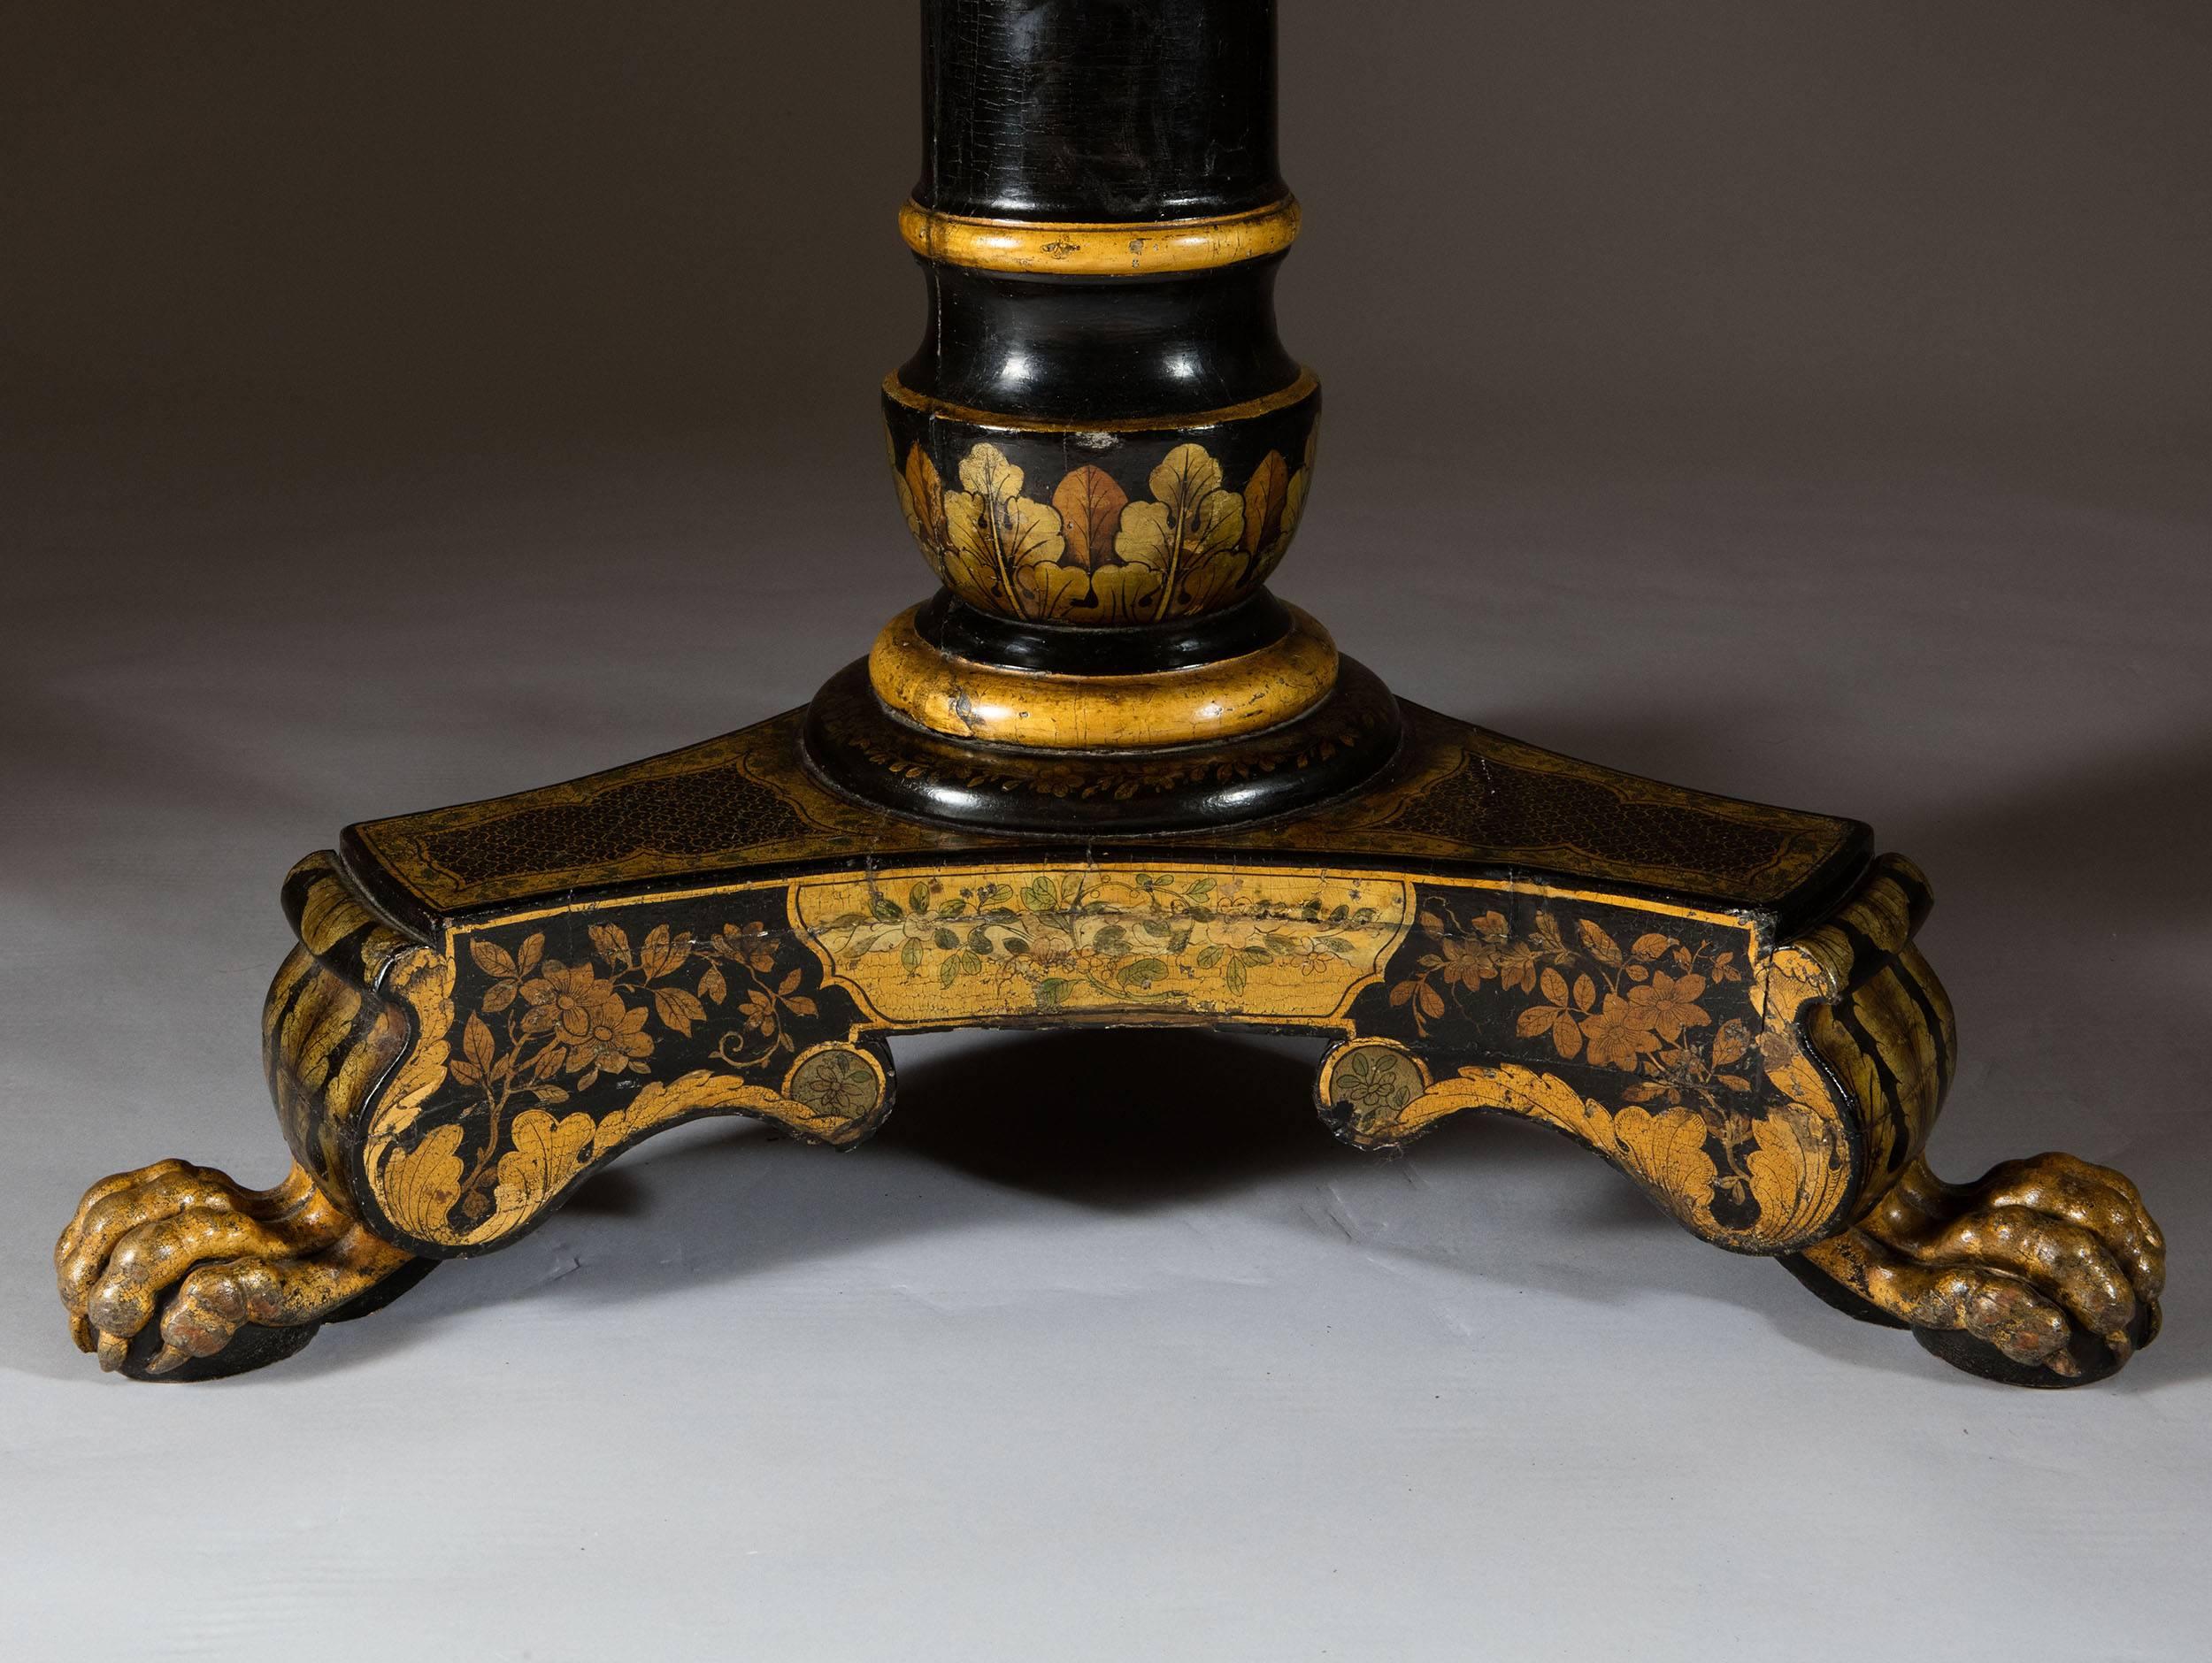 England, circa 1820. 

An exceptional and very rare early 19th century Regency black lacquer and gilt tilt-top round centre table decorated throughout with chinoiserie scenes of daily life beautifully finished in exceptional detail, amongst